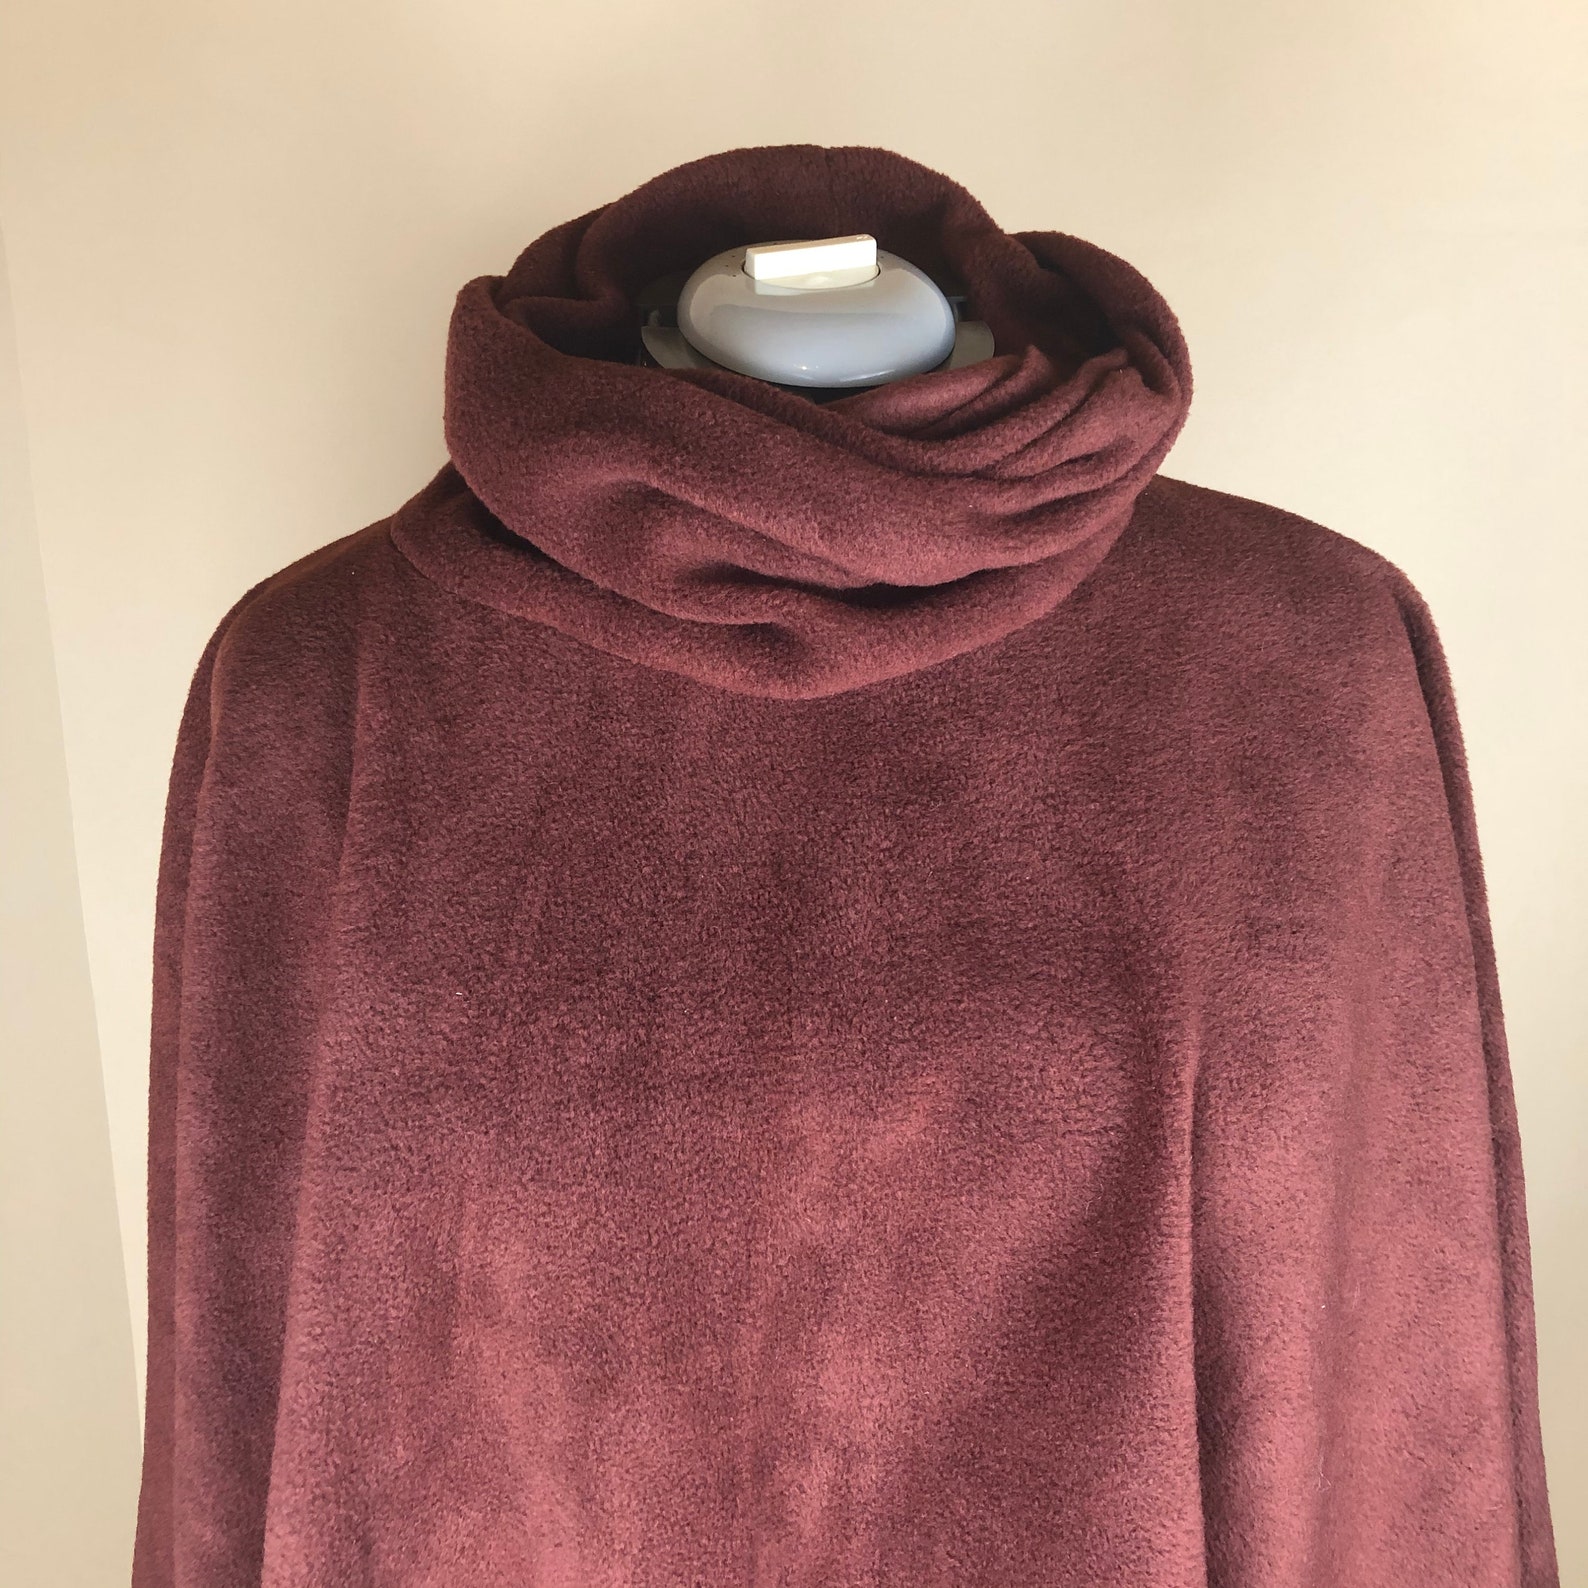 Fleece Poncho Hooded Brown Cowl neck Poncho Winter snood | Etsy